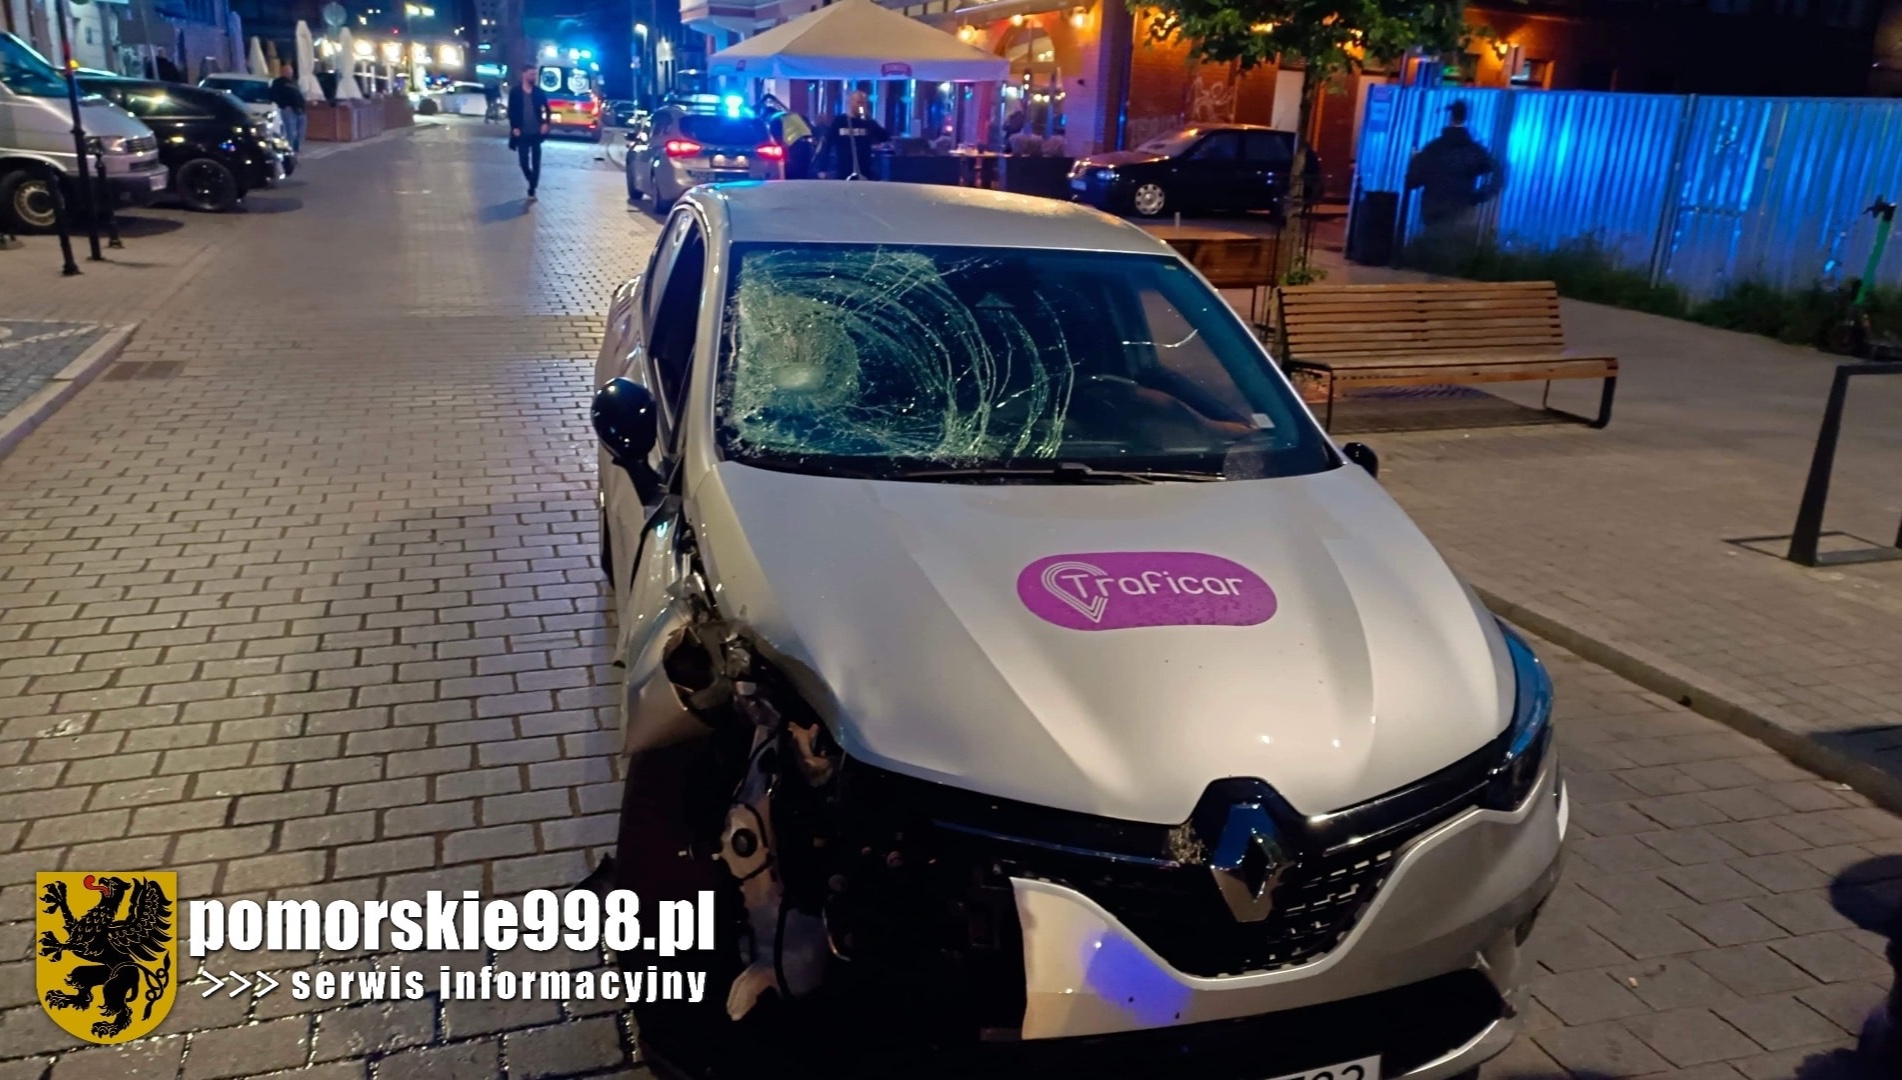 Moments of horror in the centre of Gdańsk. A driver drove into people at a mall